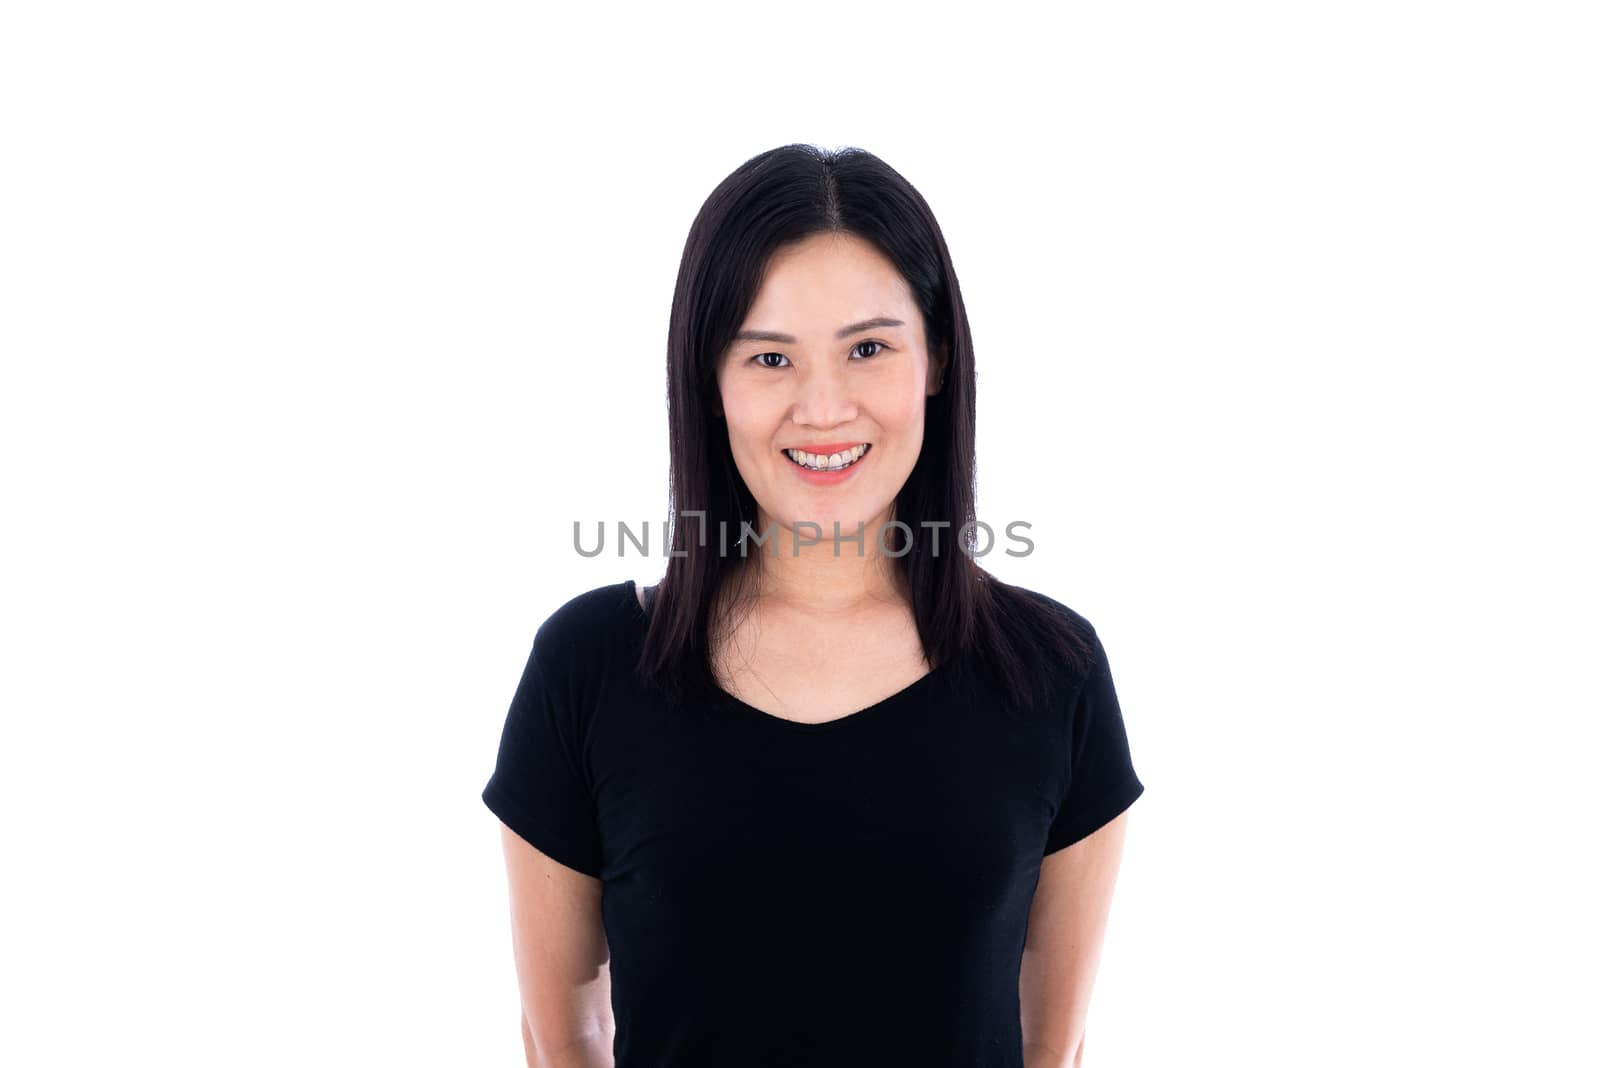 A beautiful Asian Thai woman smiling and happy isolated on white background.